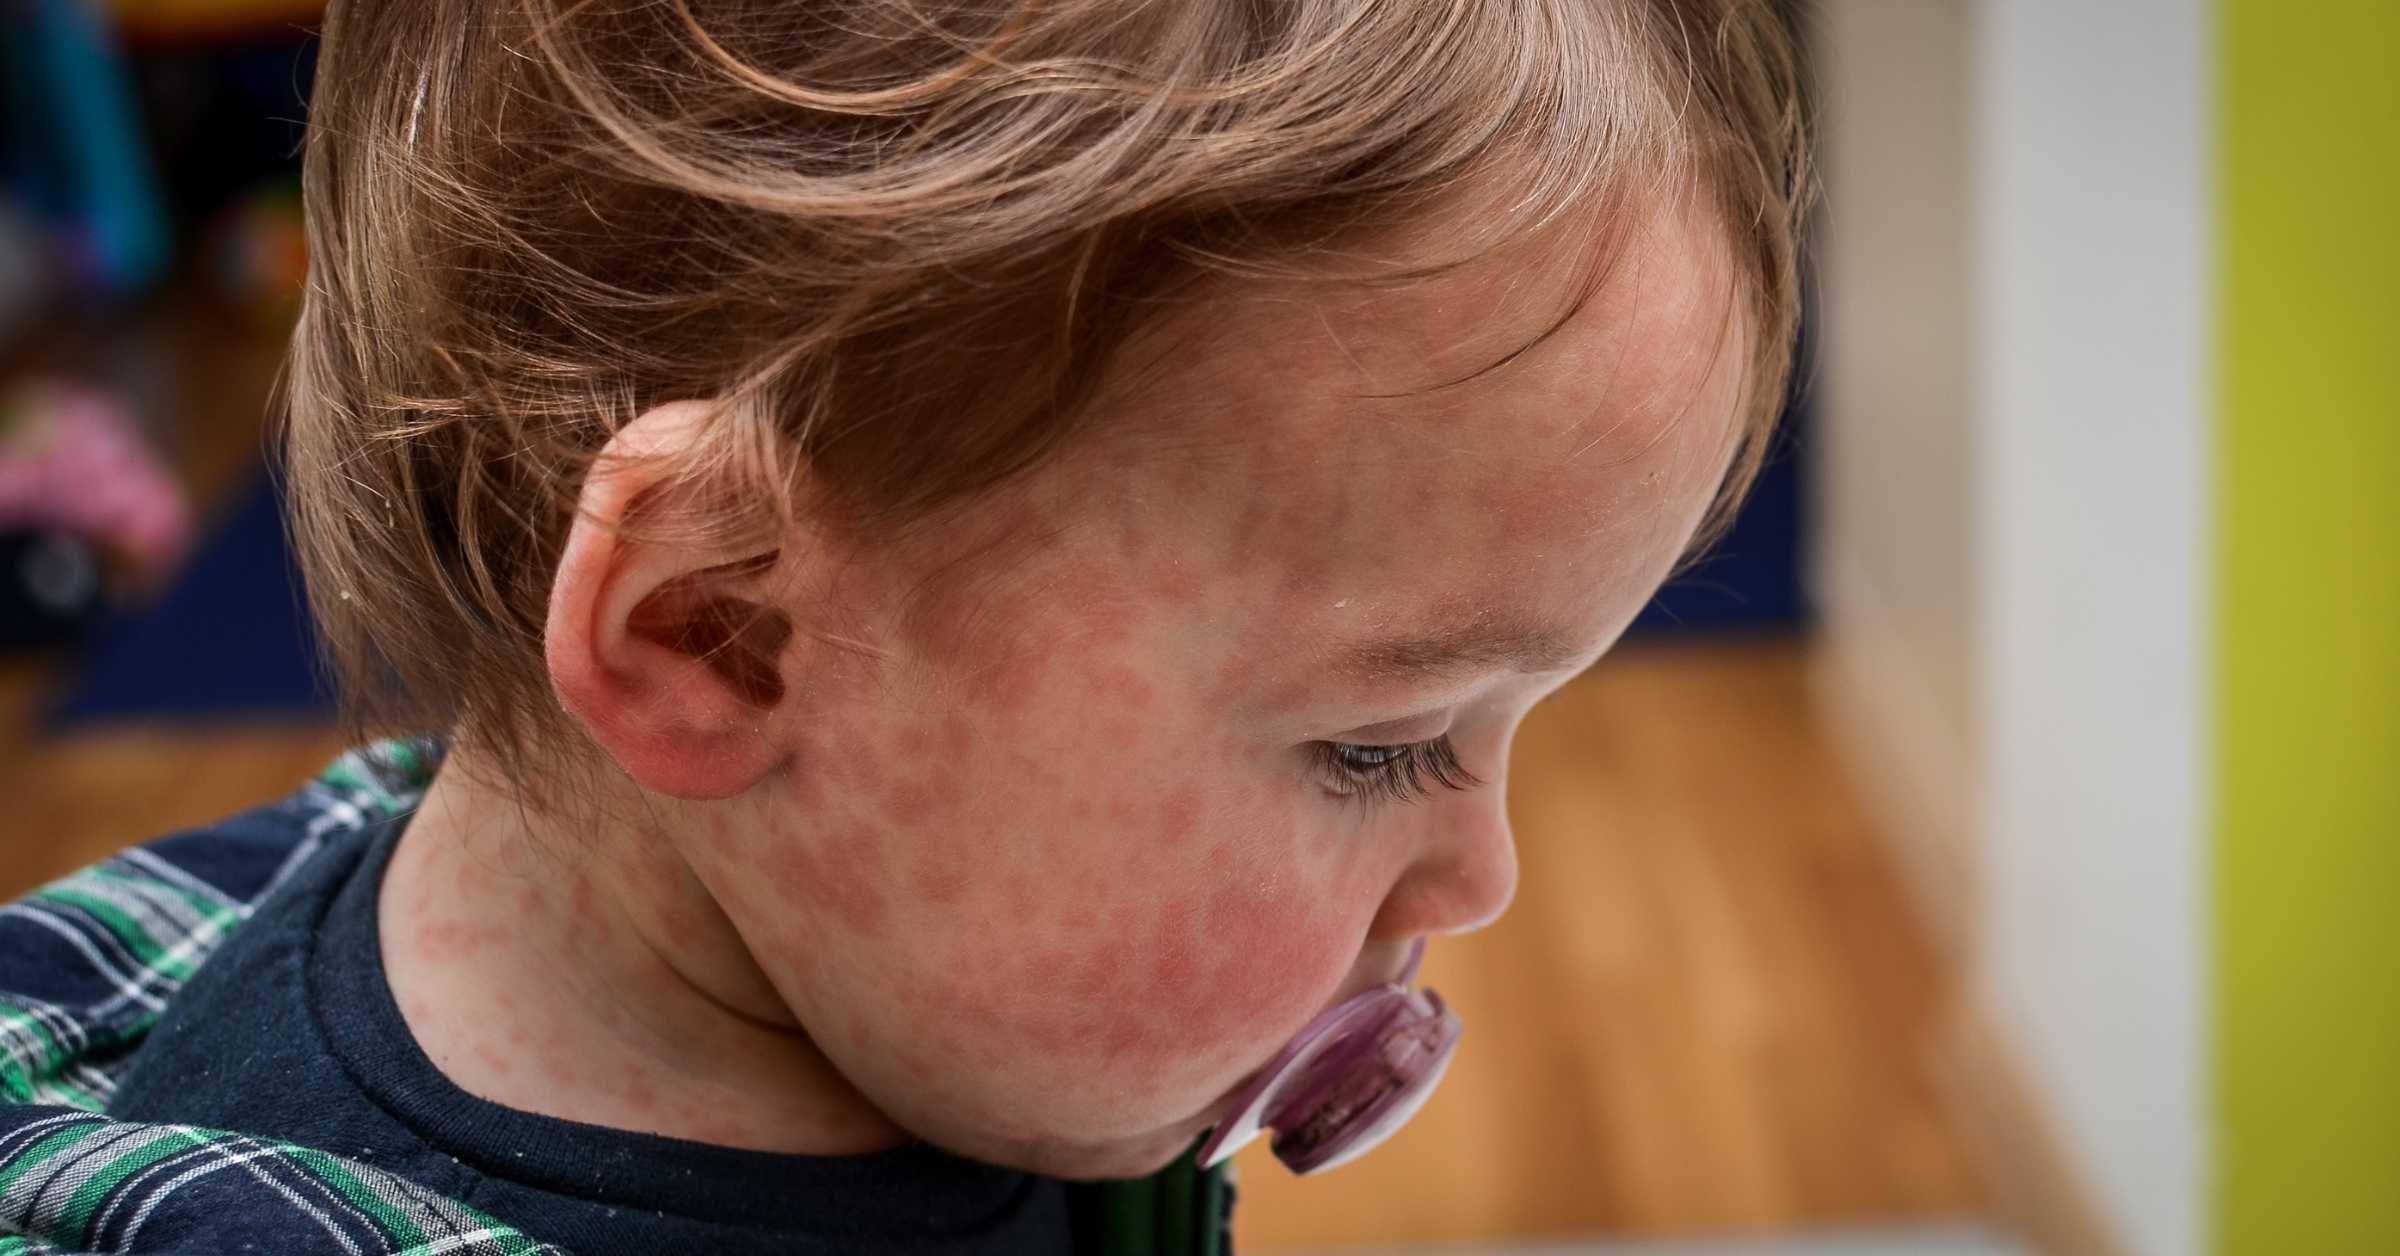 A baby has the measles rash on his face.